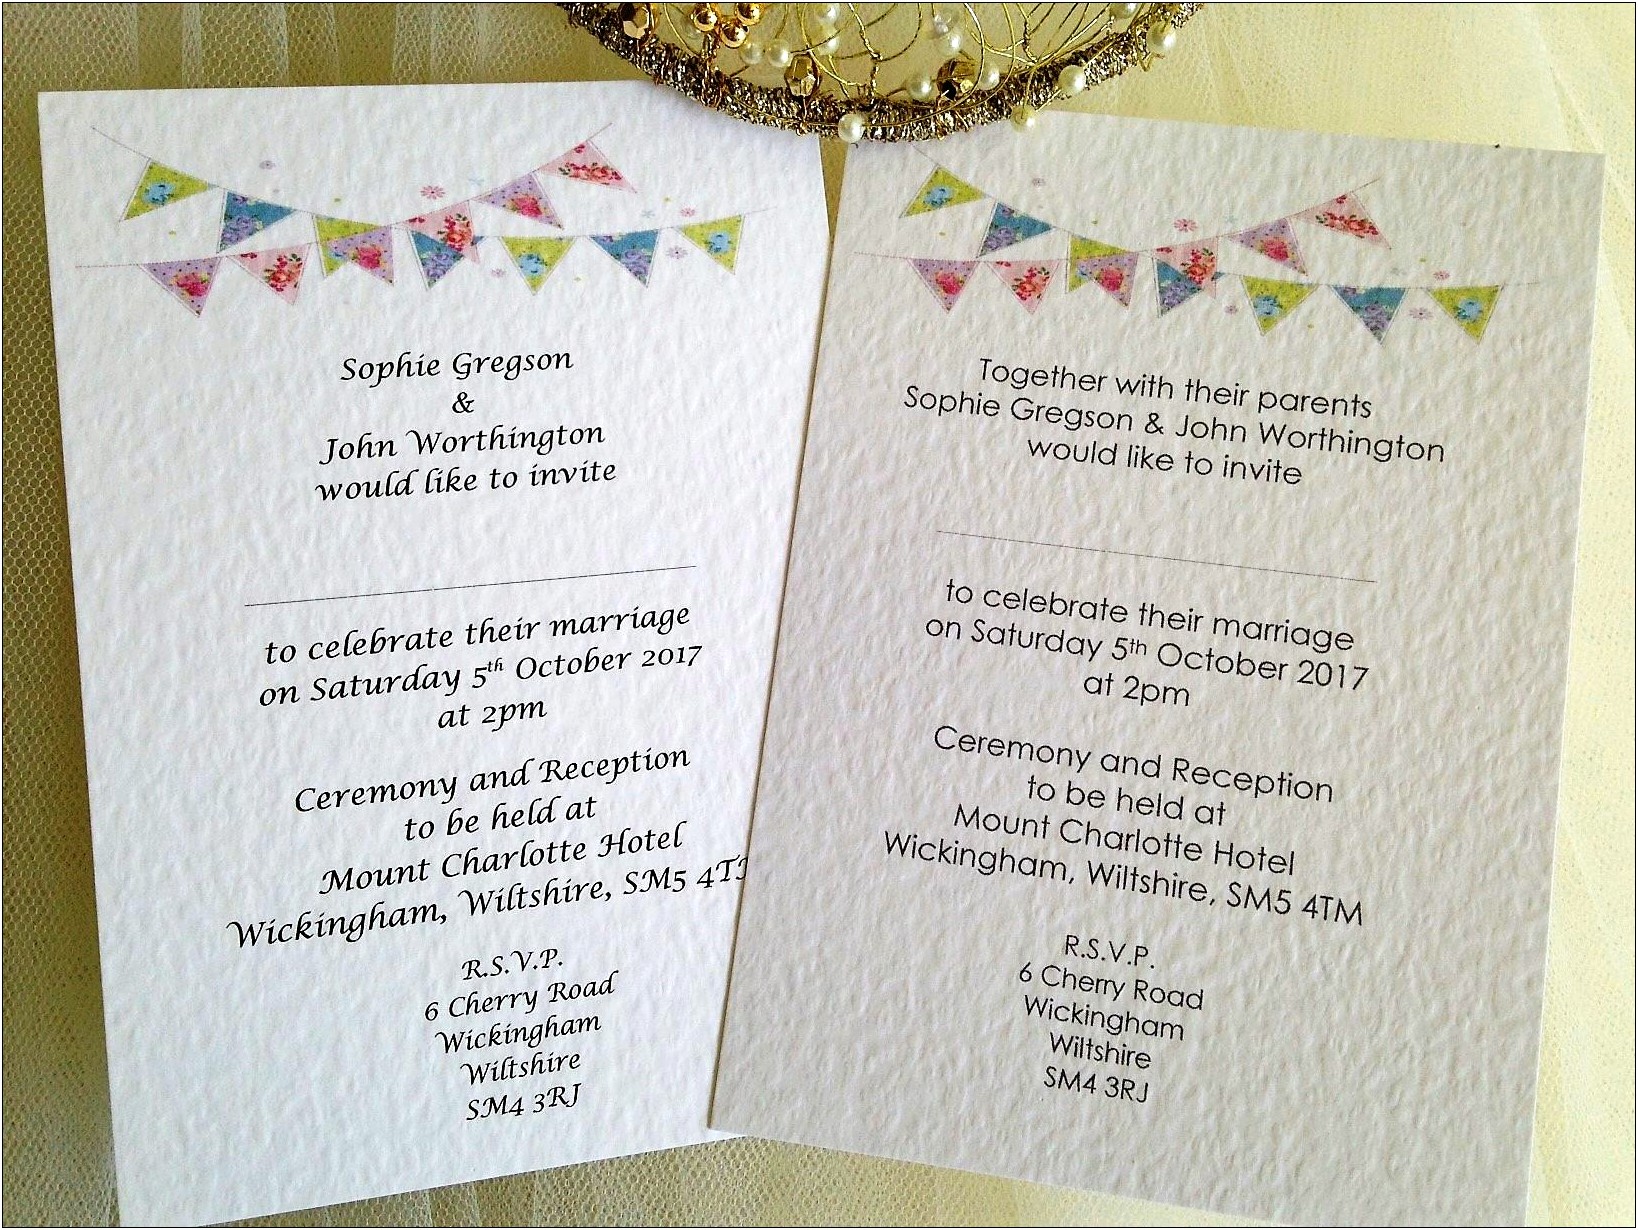 Hotel Information To Put In Wedding Invitations